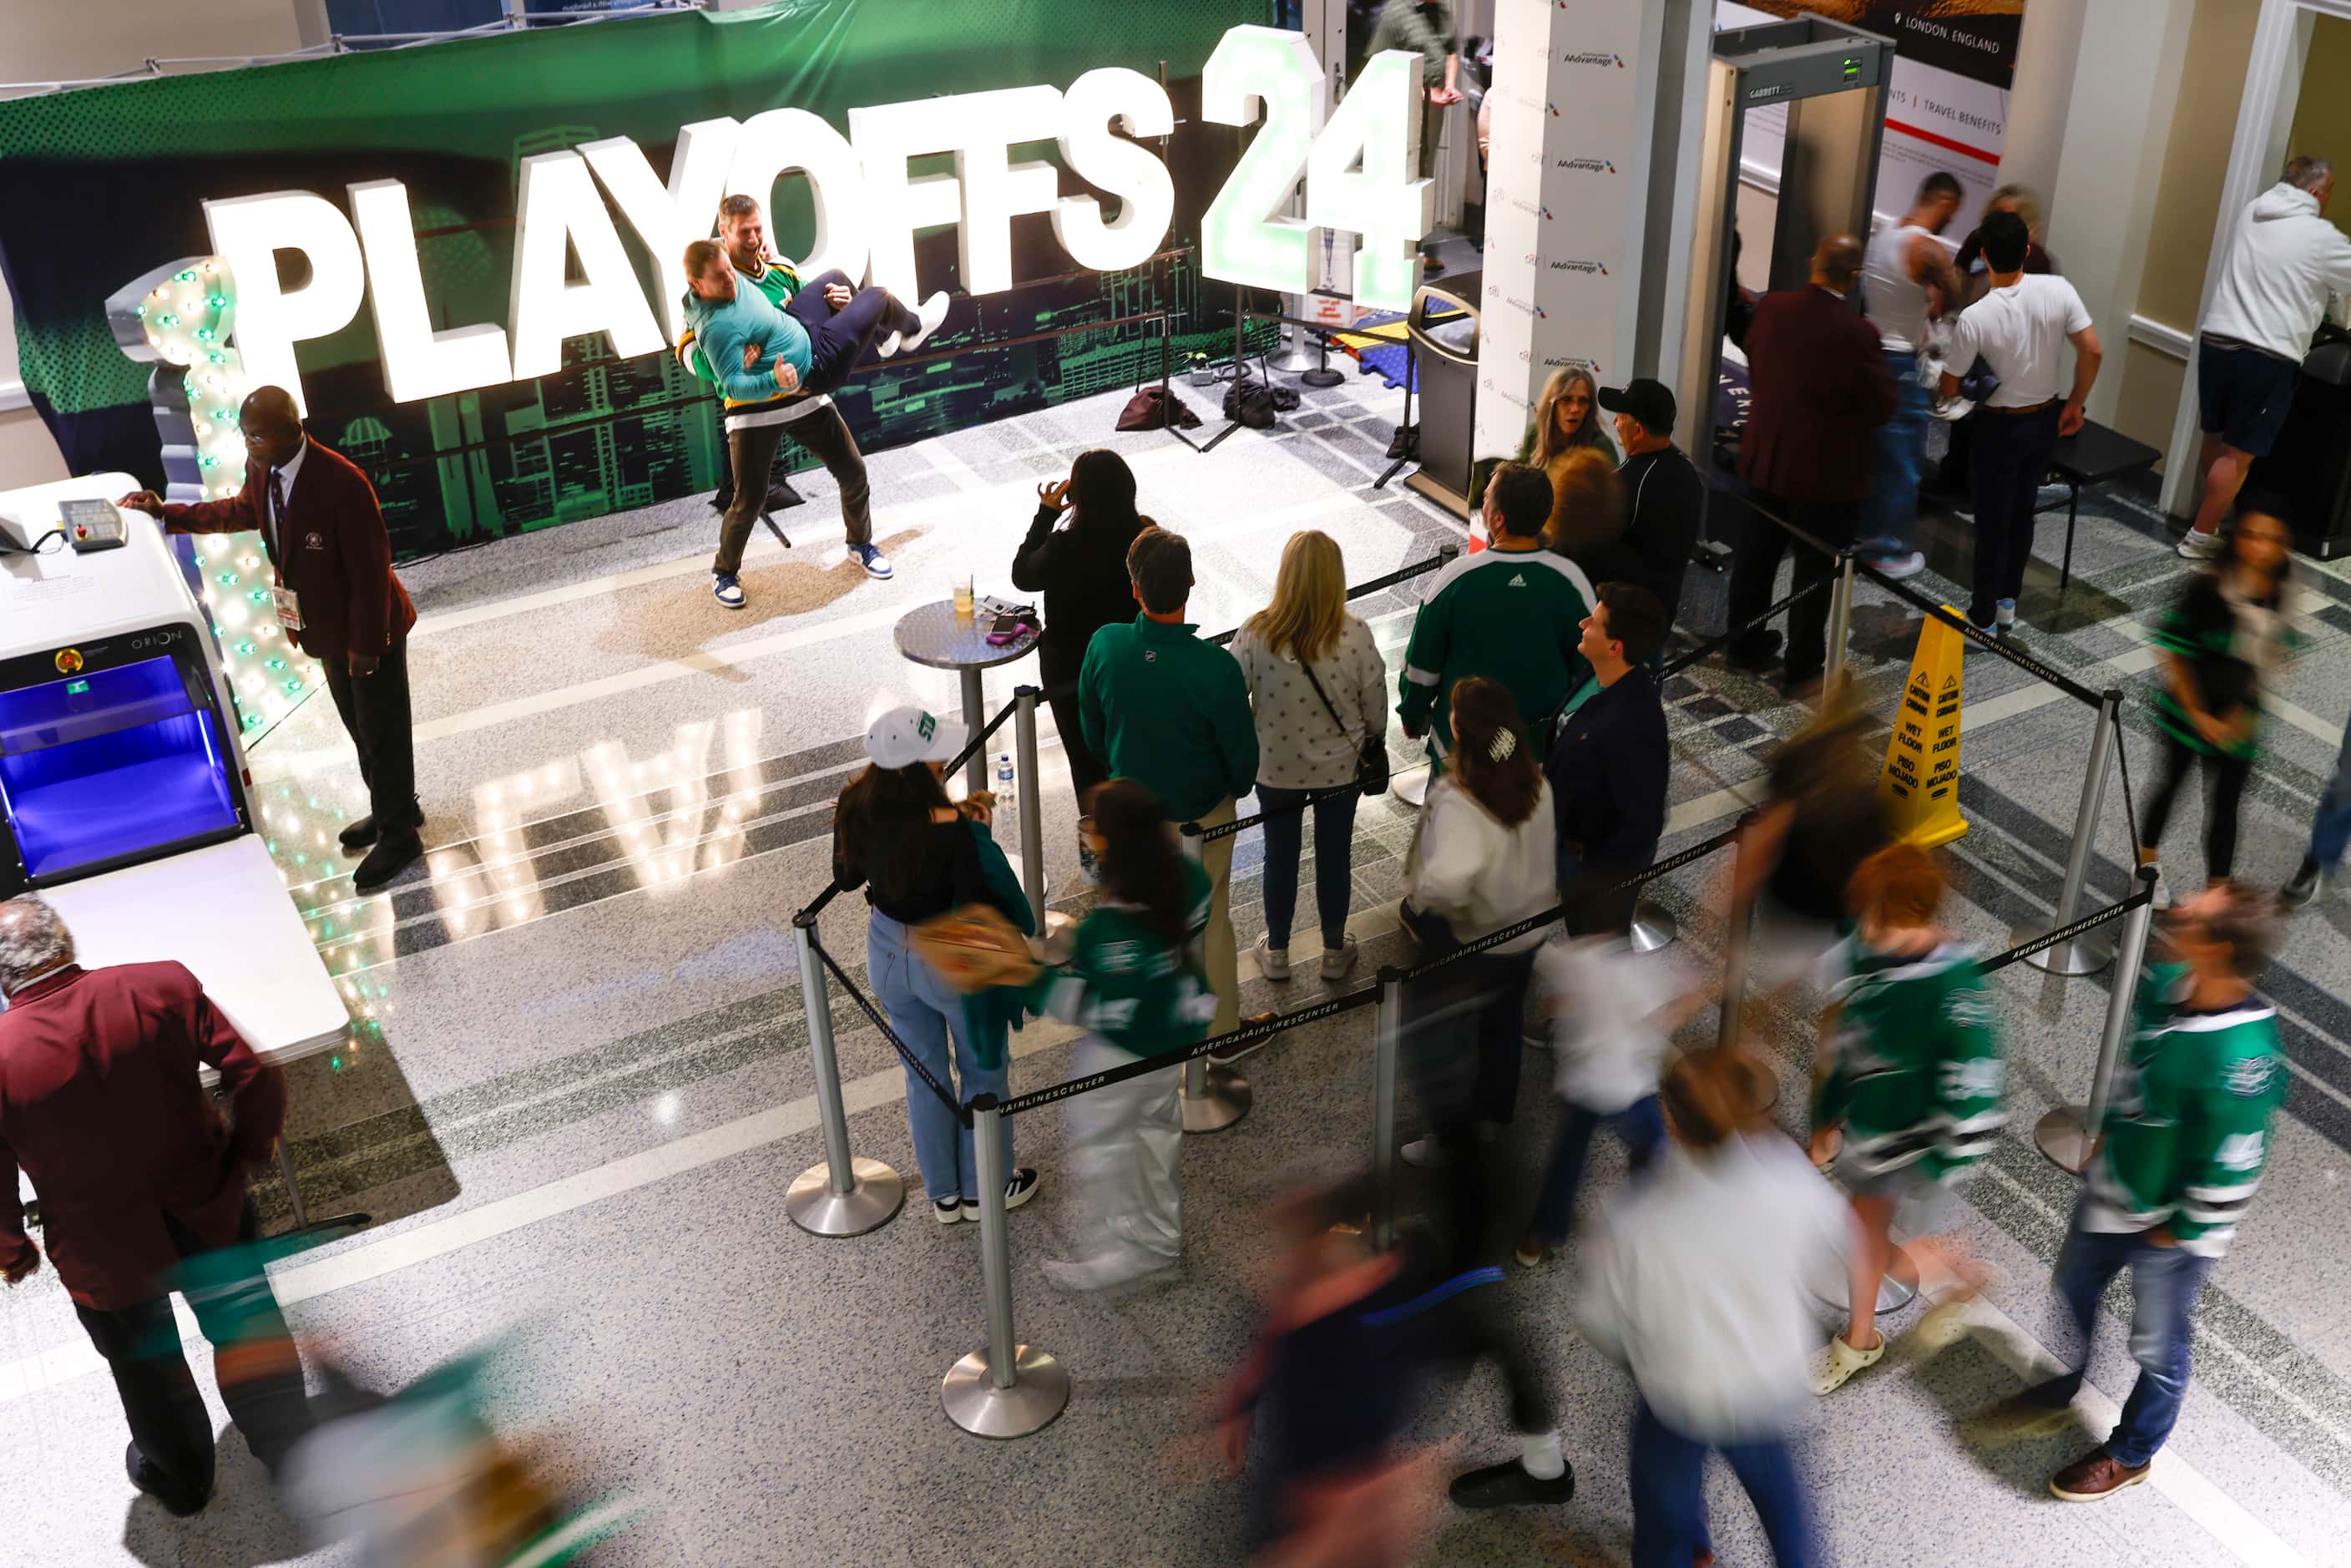 Fans pose for photos in front of a sign as others cruises through the concourse ahead of...